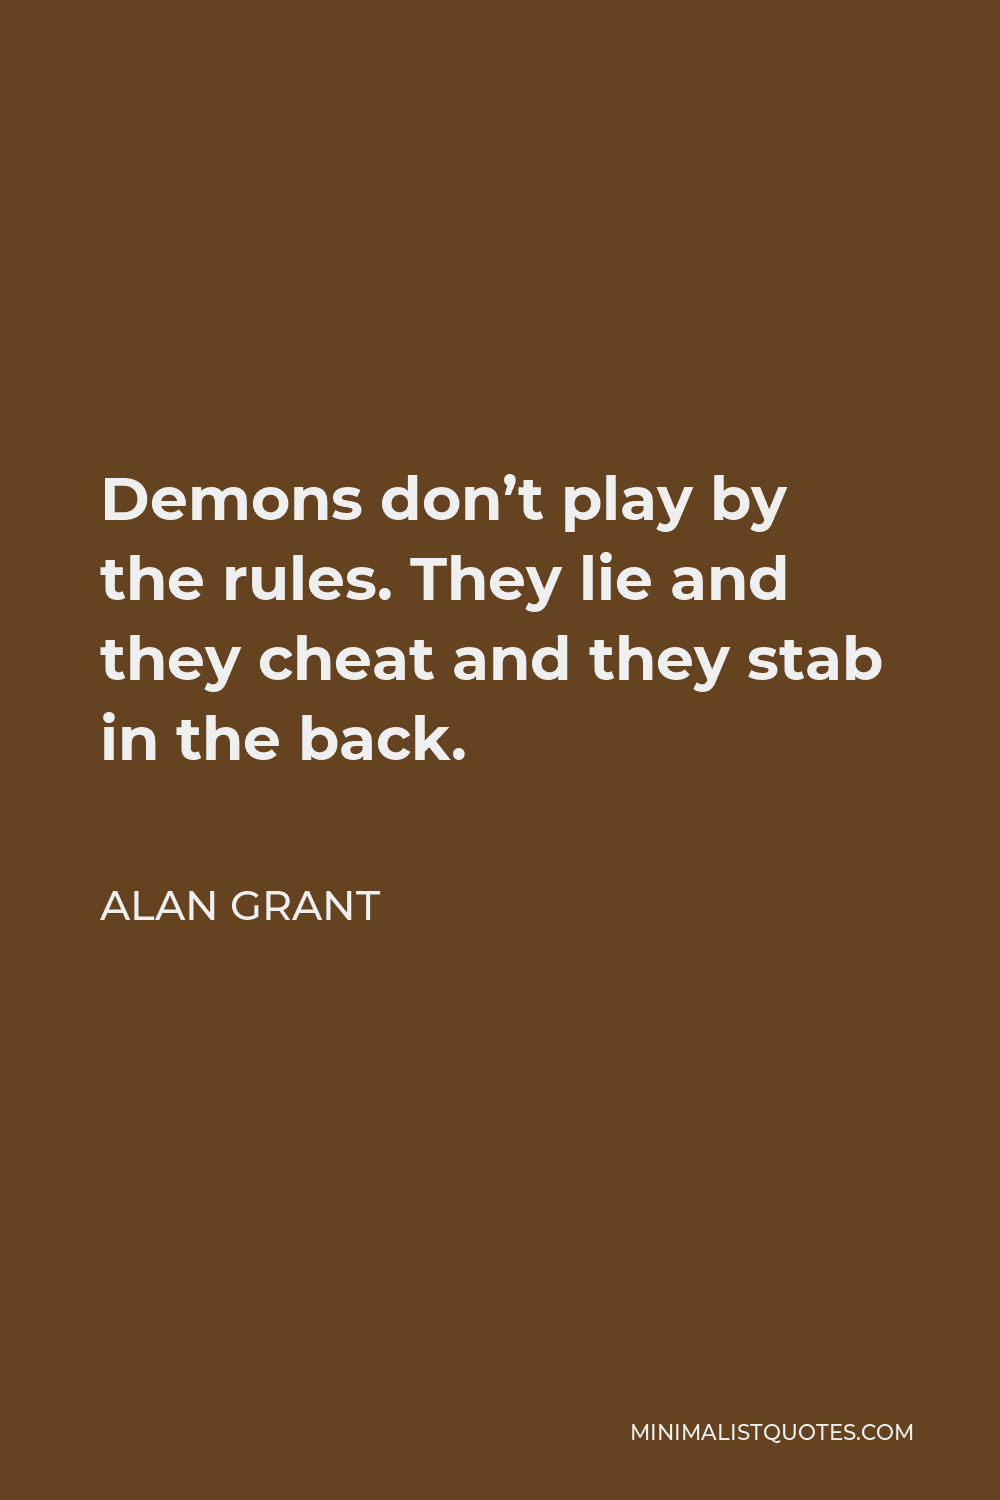 Alan Grant Quote - Demons don’t play by the rules. They lie and they cheat and they stab in the back.